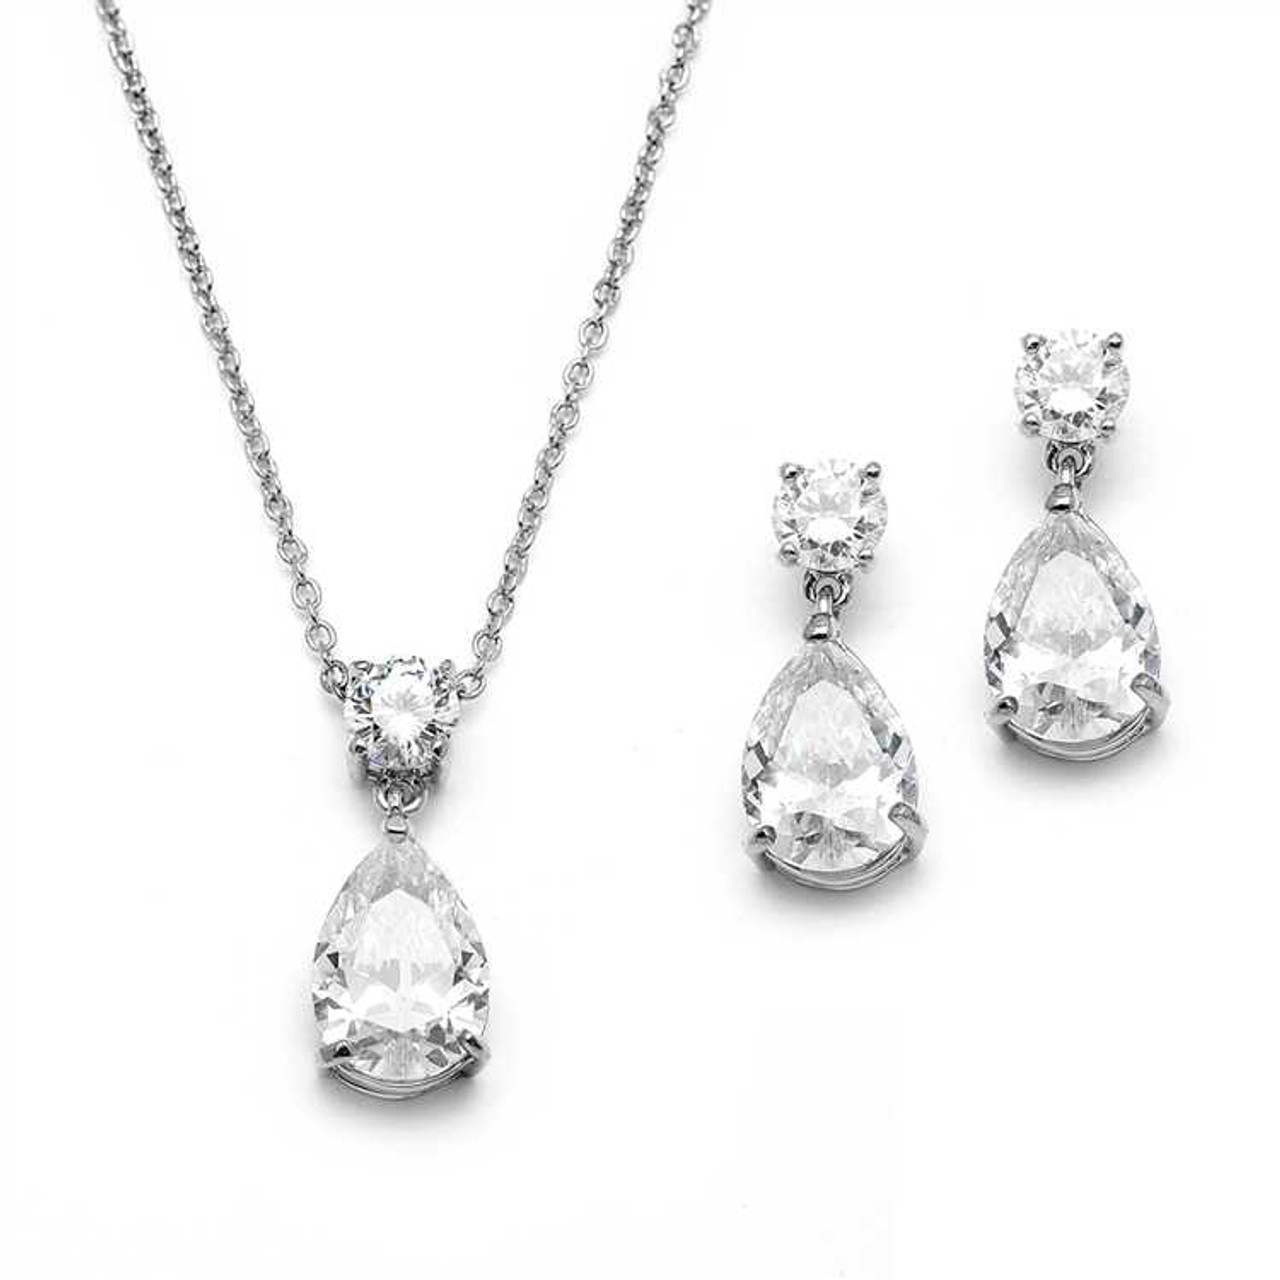 silver prom necklaces